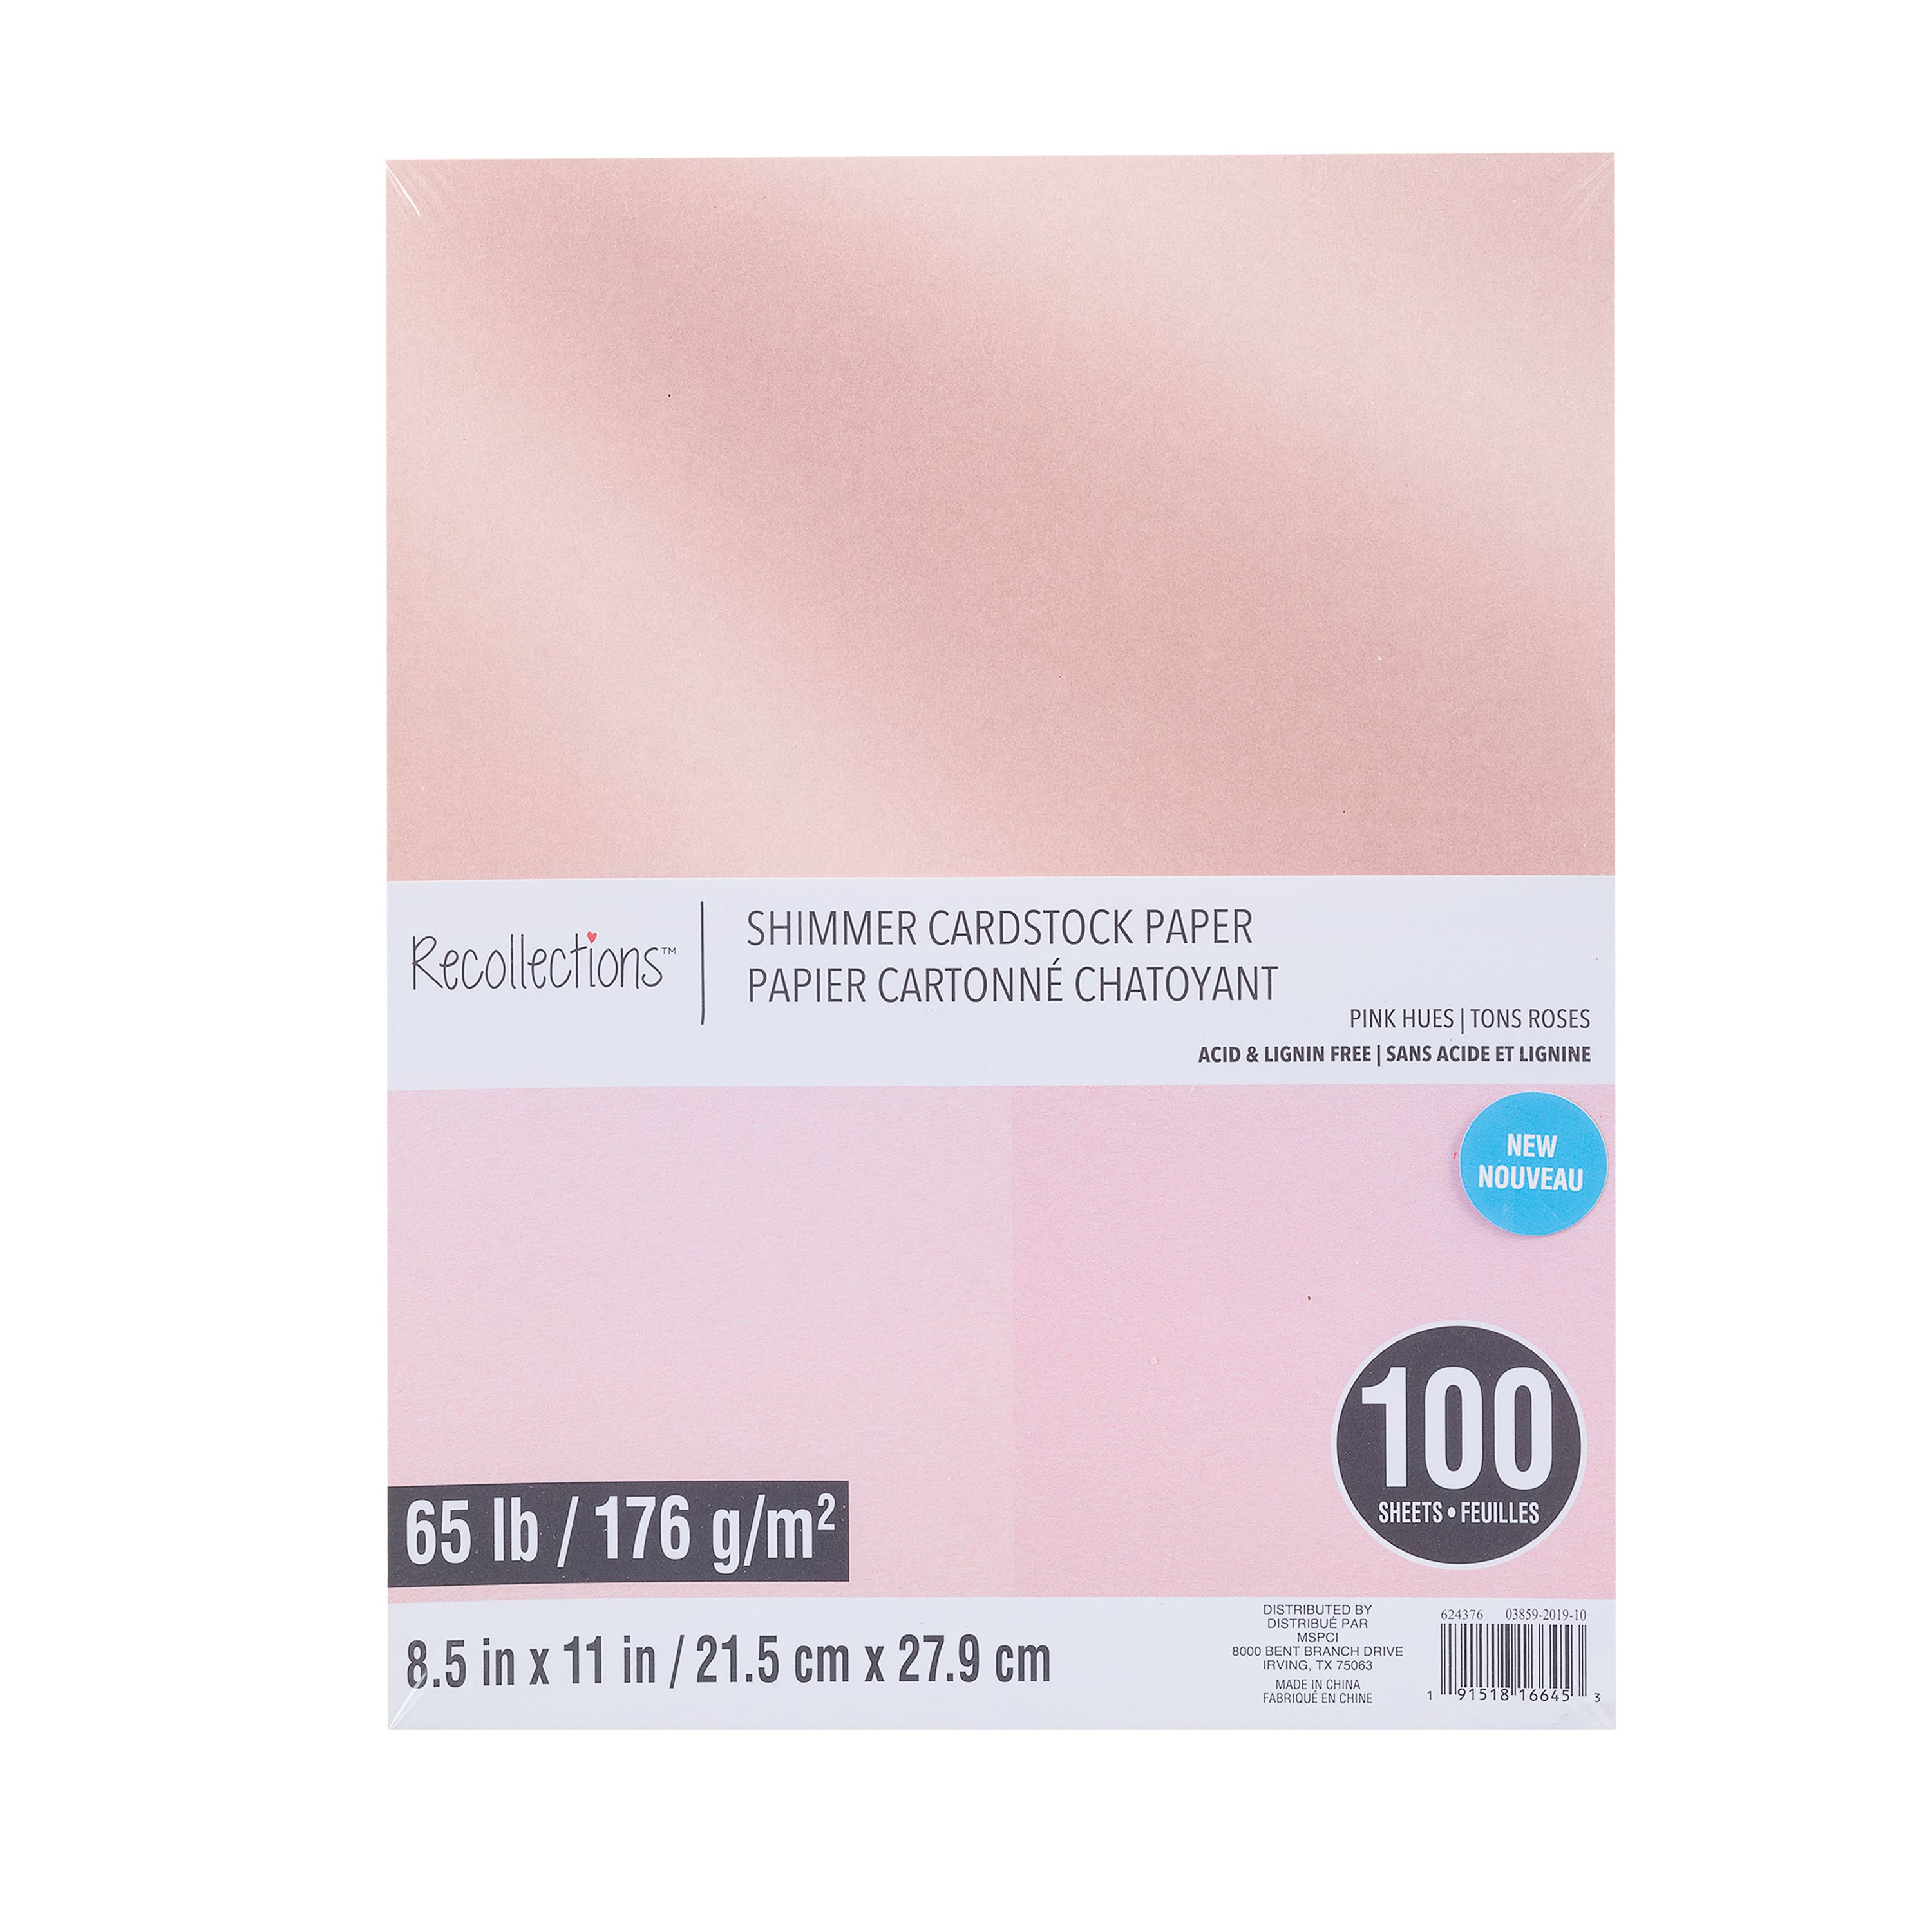 Pink Hues Shimmer 8.5 x 11 Cardstock Paper by Recollections™, 100 Sheets